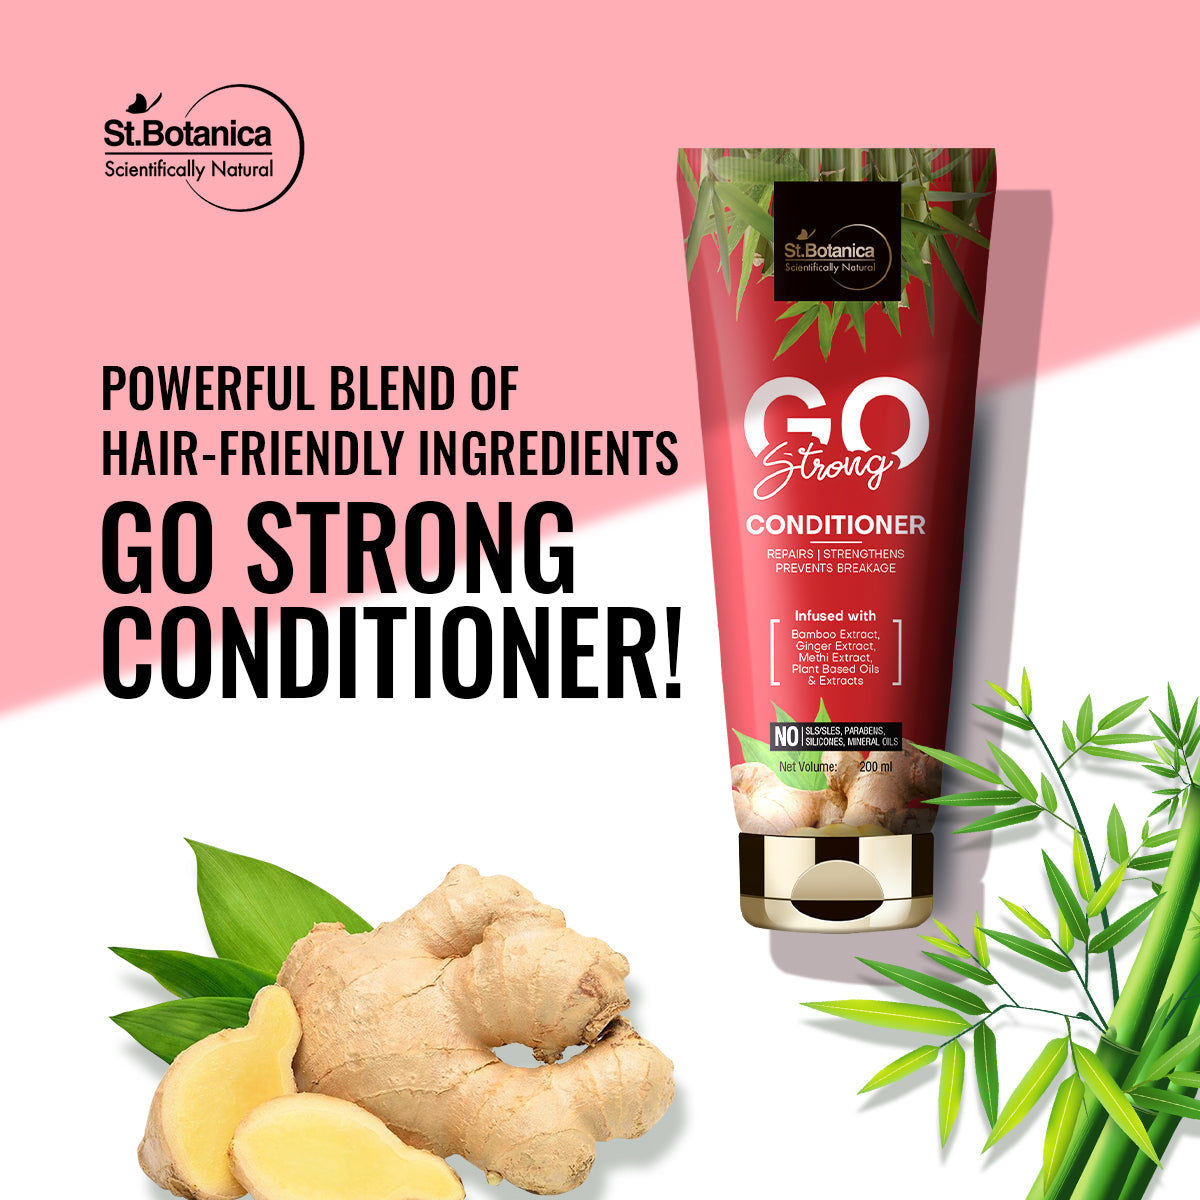 St.Botanica Go Strong Hair Conditioner - With Bamboo Extract, Ginger Extract, Methi Extract, No Sls/ Sulphate, Paraben, Silicones, Colors, 200 ml